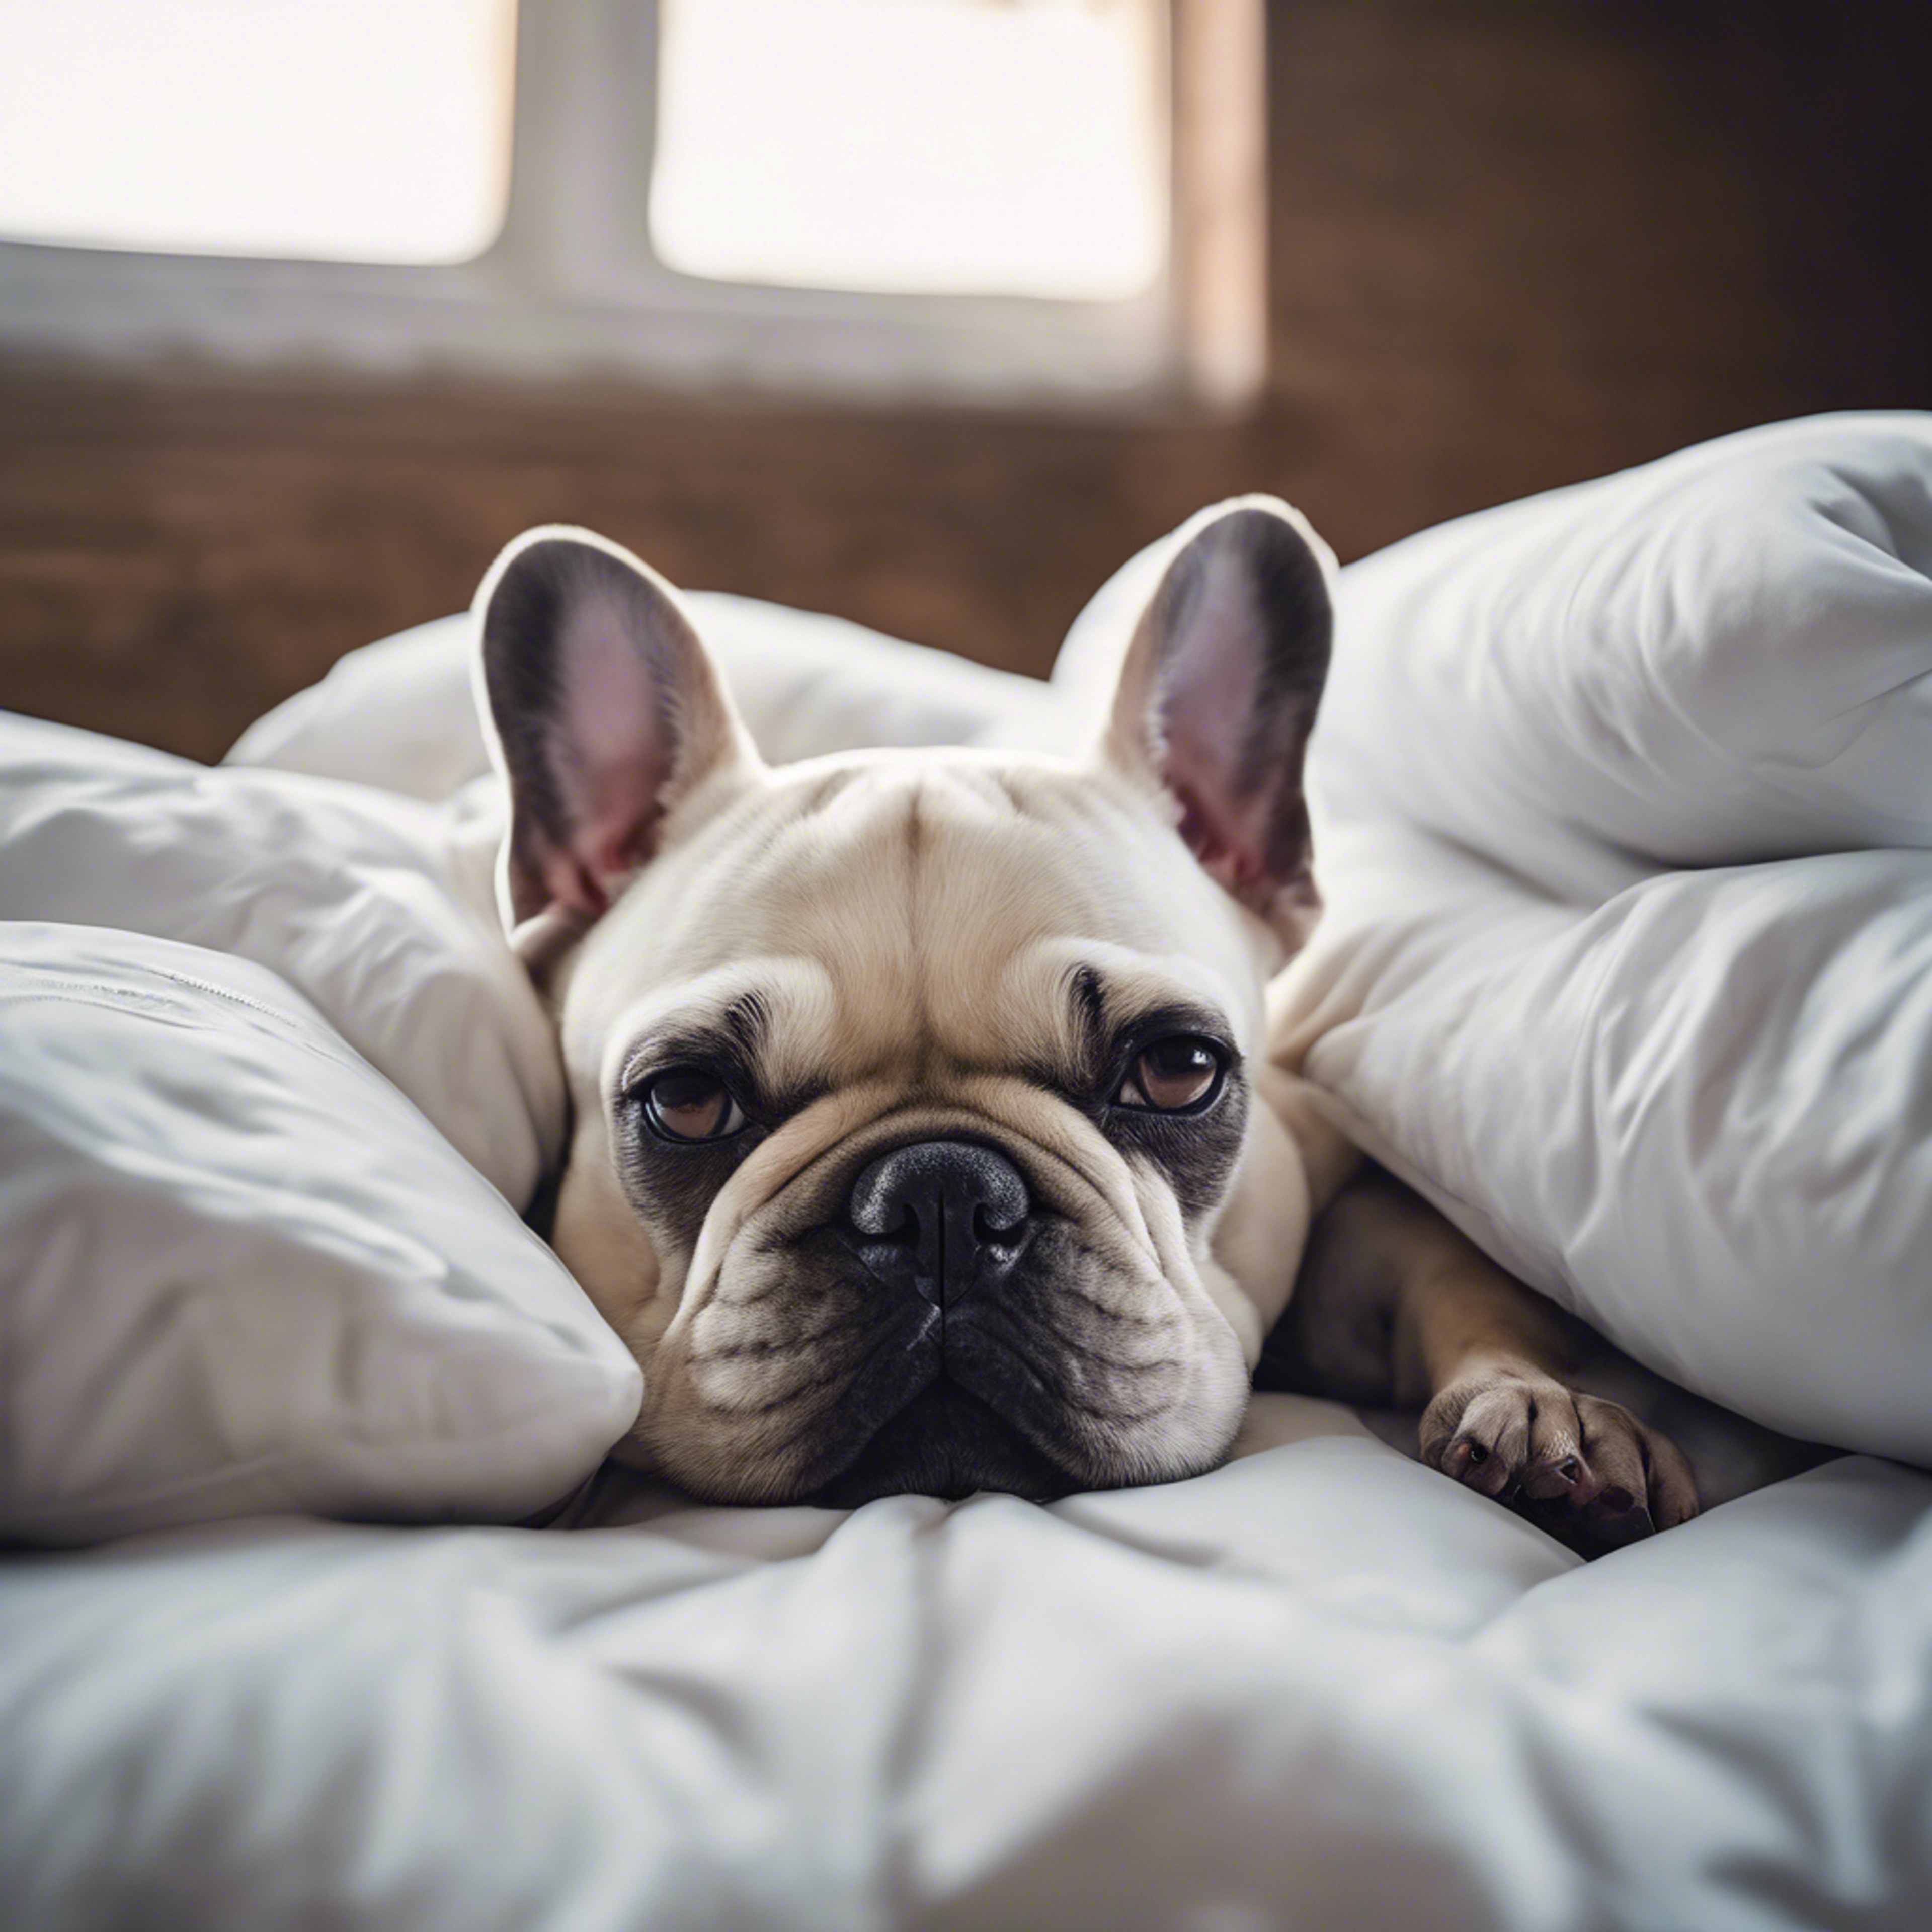 A young French Bulldog falling into a deep sleep, nestled into a pile of comfy pillows on a king-size bed. Tapetai[35e5ea00e17d41afbf2f]